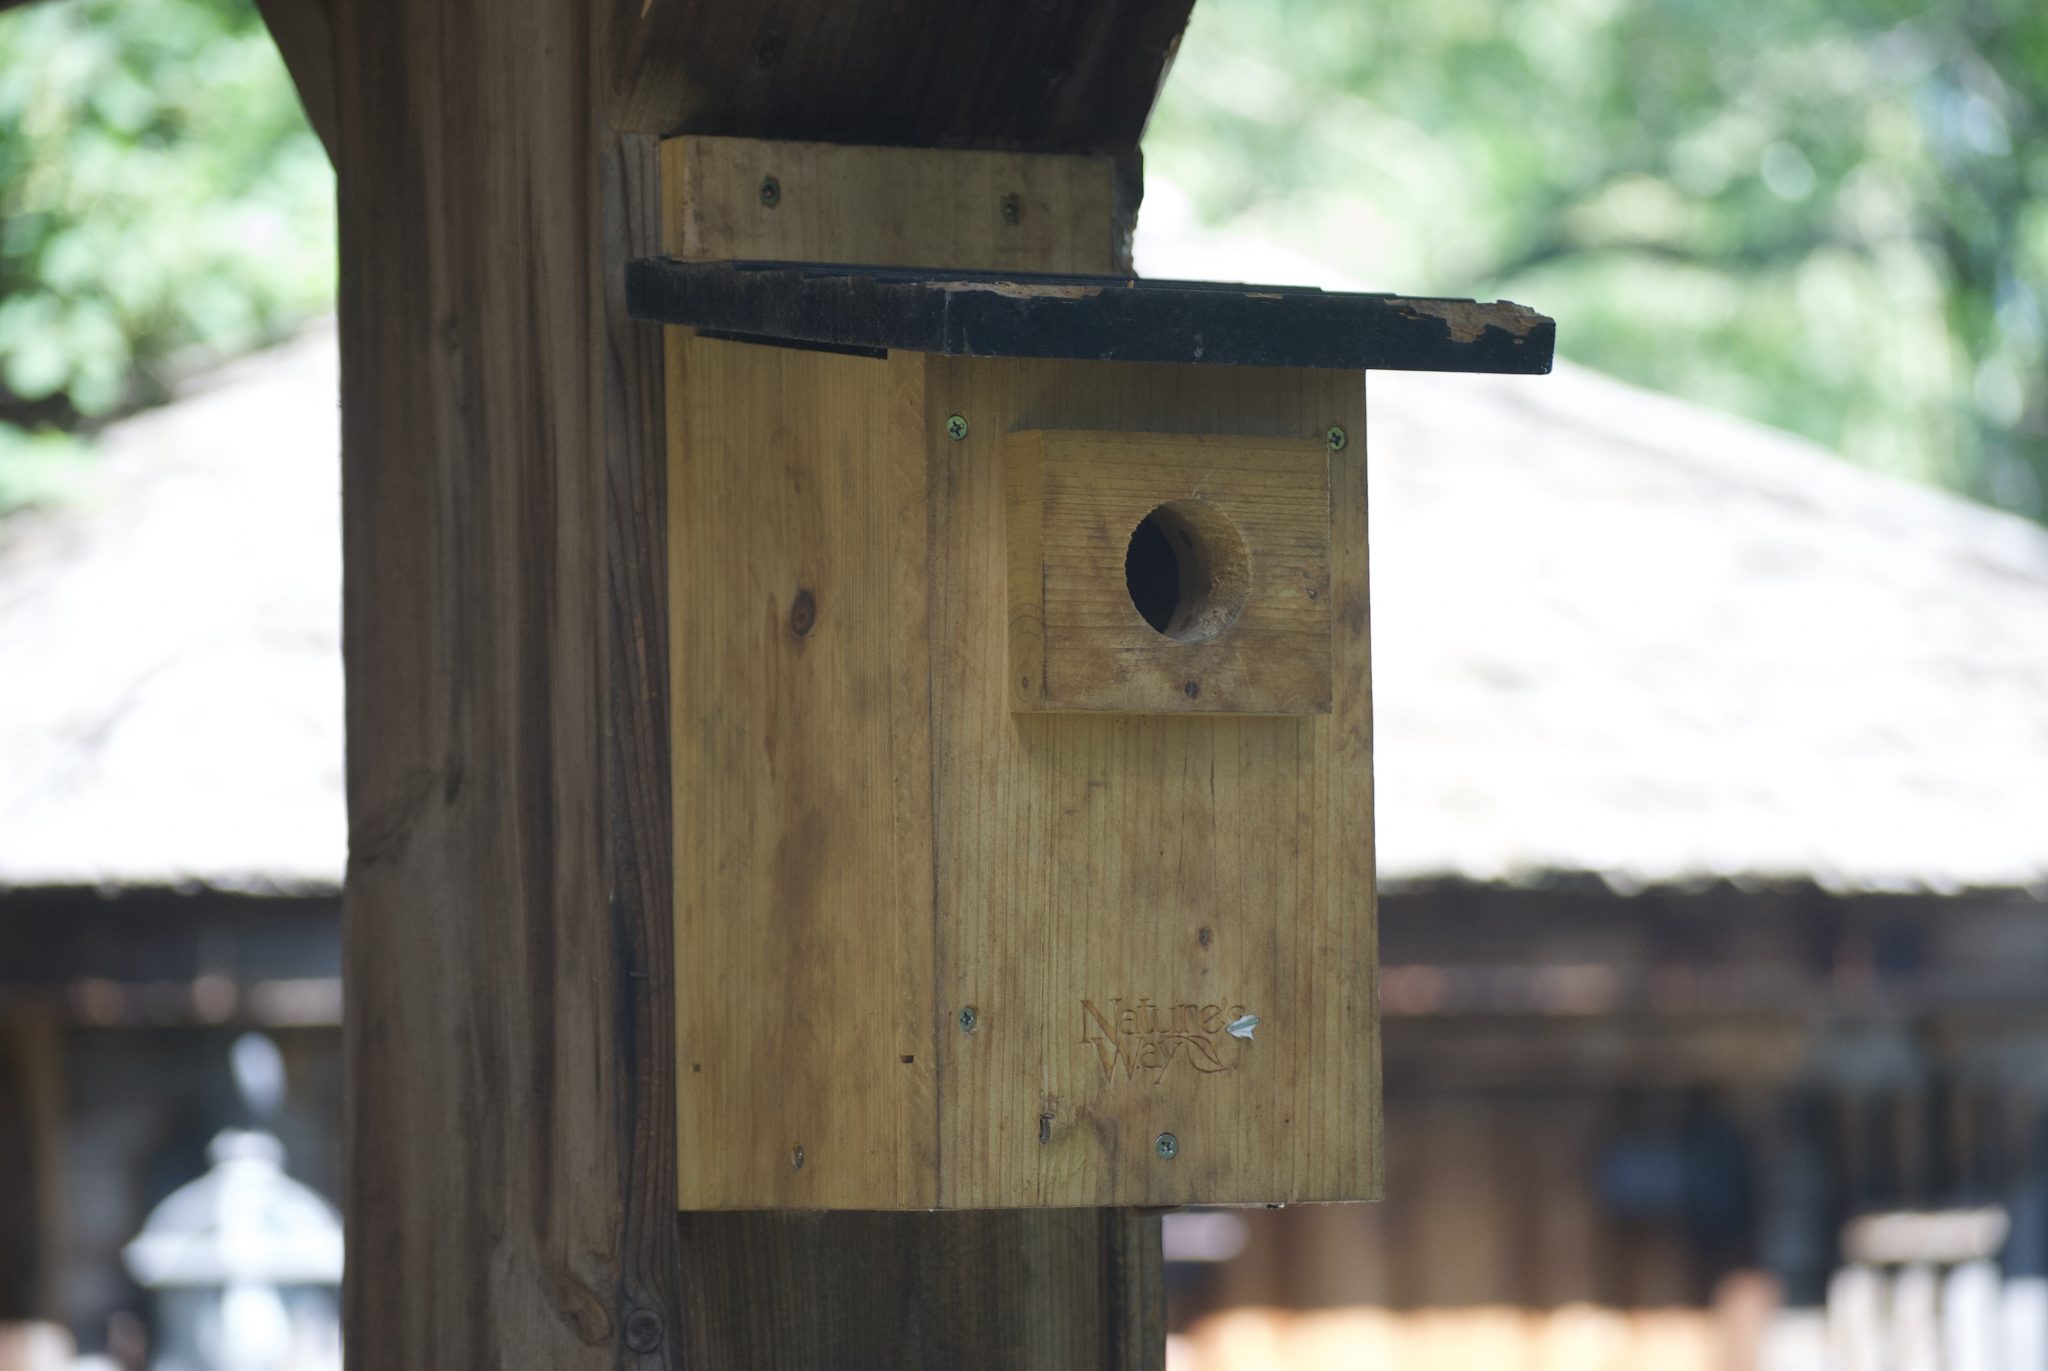 A birdhouse nailed to a support beam.